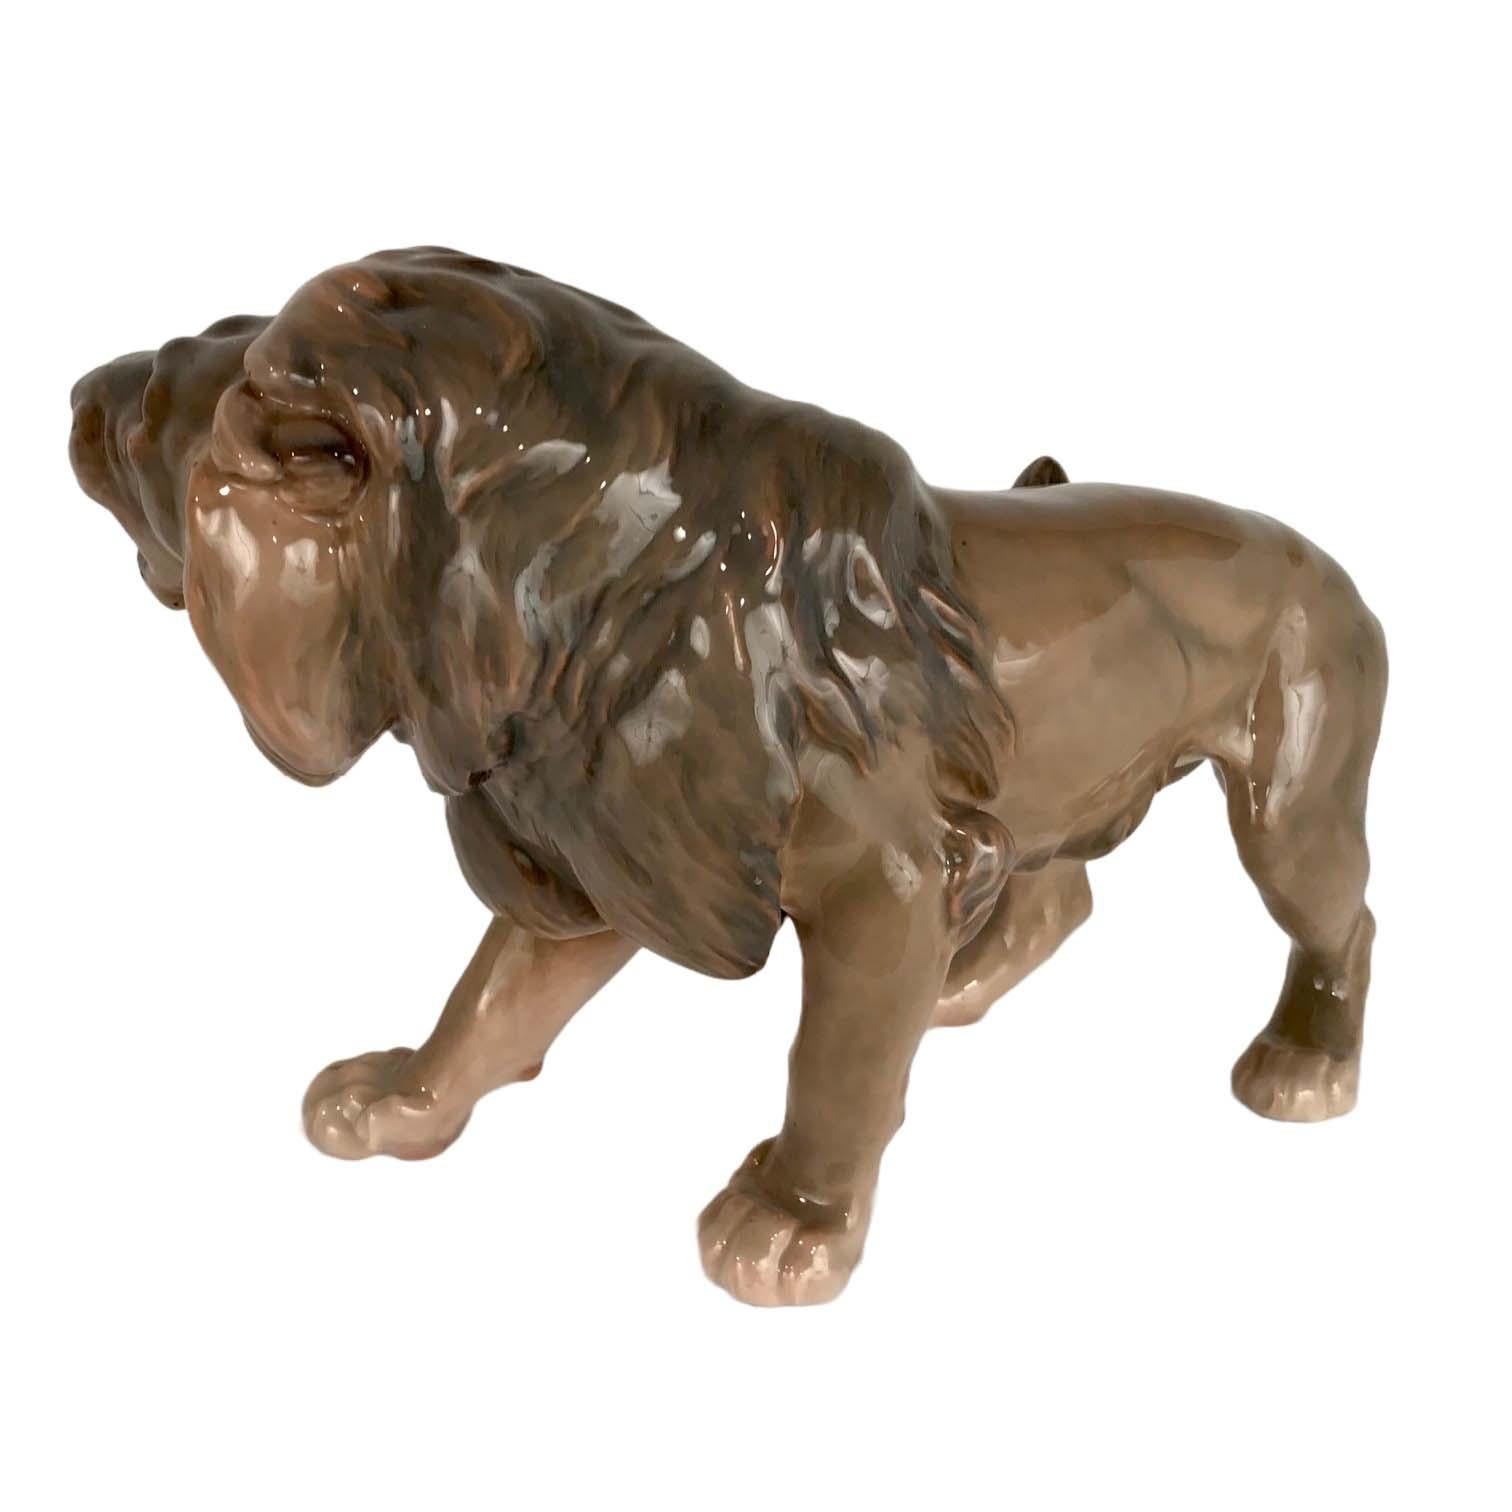 Large Bing and Grondahl Porcelain Roaring Lion In Excellent Condition For Sale In Montreal, QC